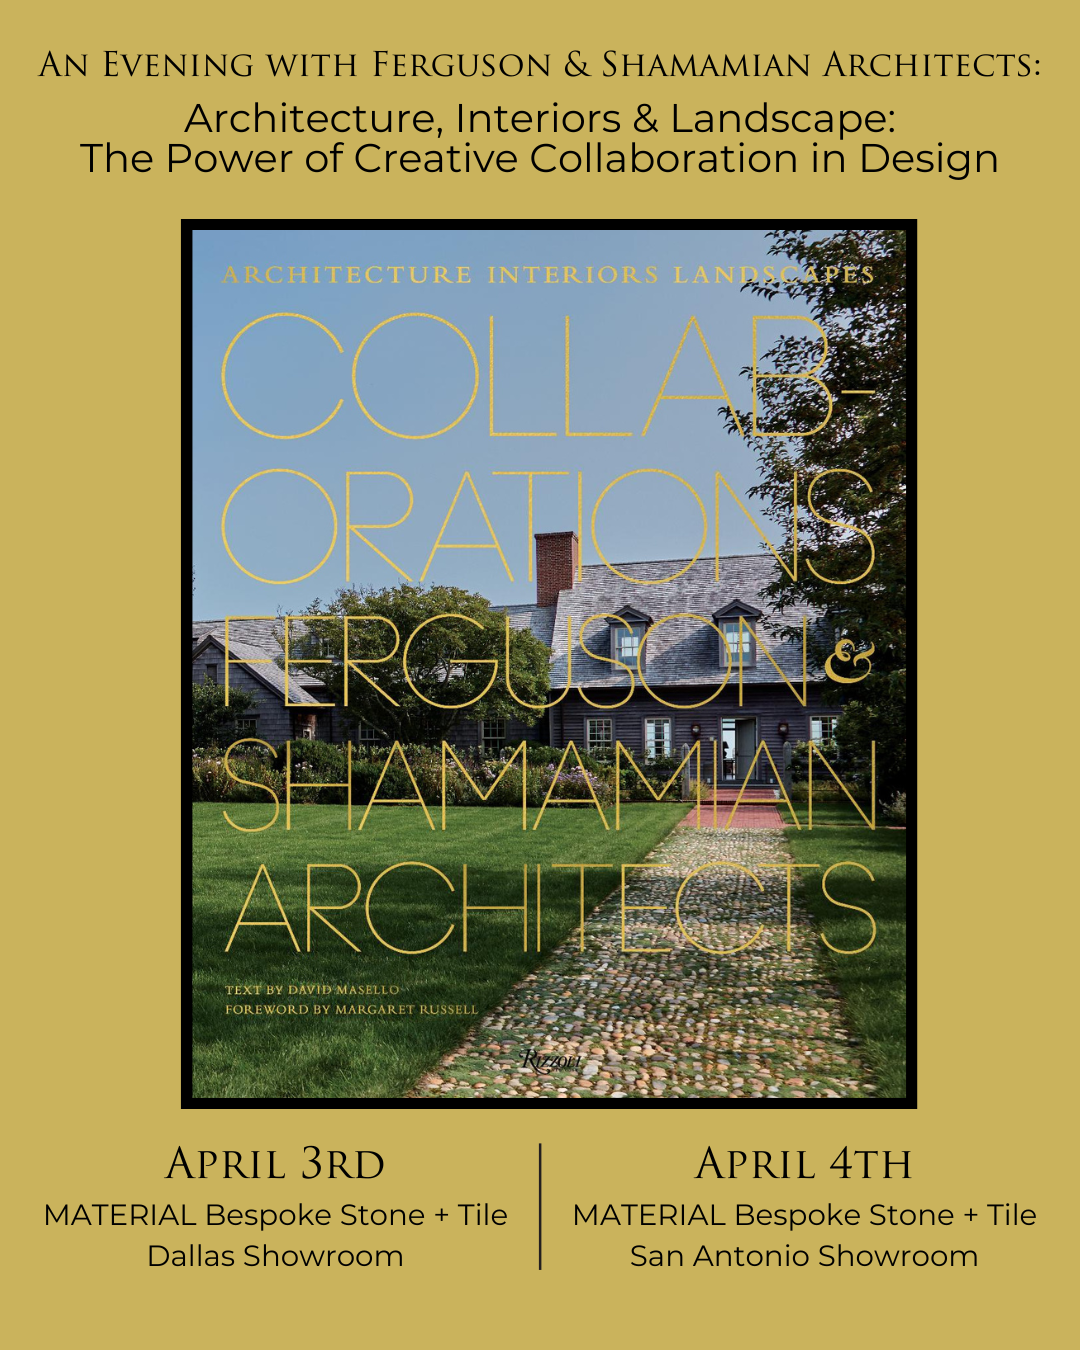 An Evening with Damian Samora of Ferguson & Shamamian Architects: “Architecture, Interiors & Landscape: The Power of Creative Collaboration in Design